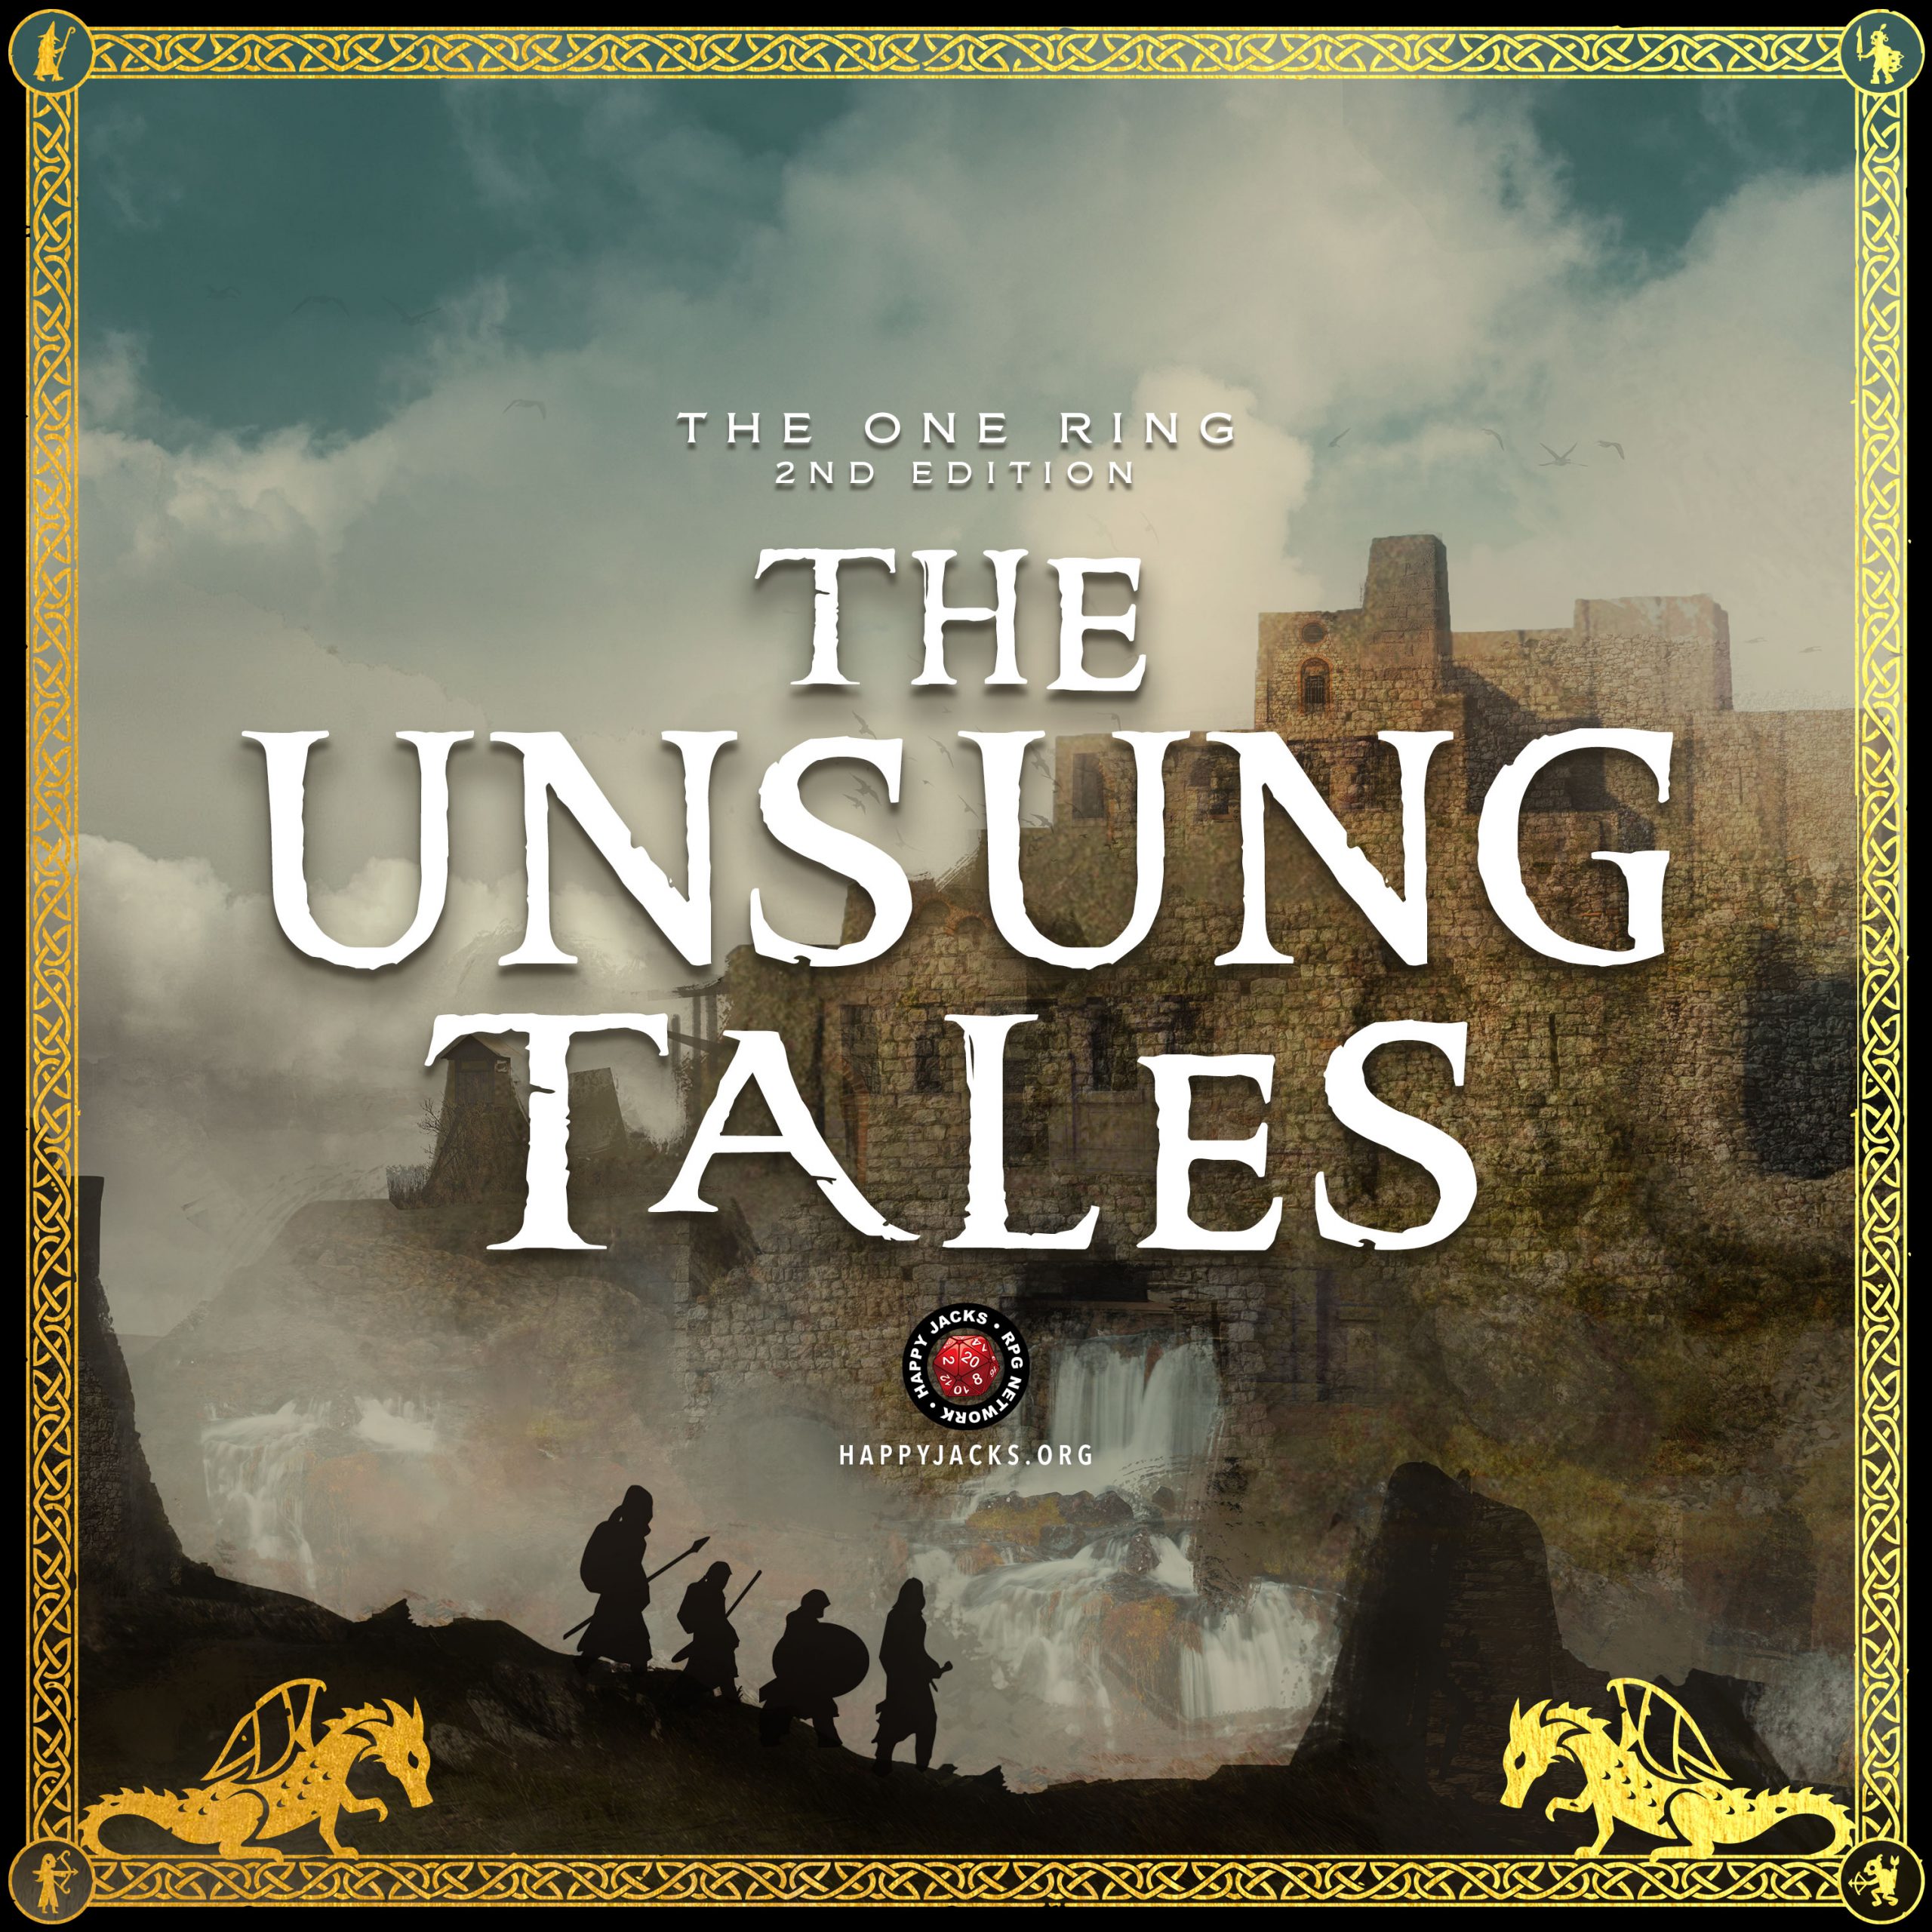 UNSUNG17 The Ghost Bird | The Unsung Tales | The One Ring 2e